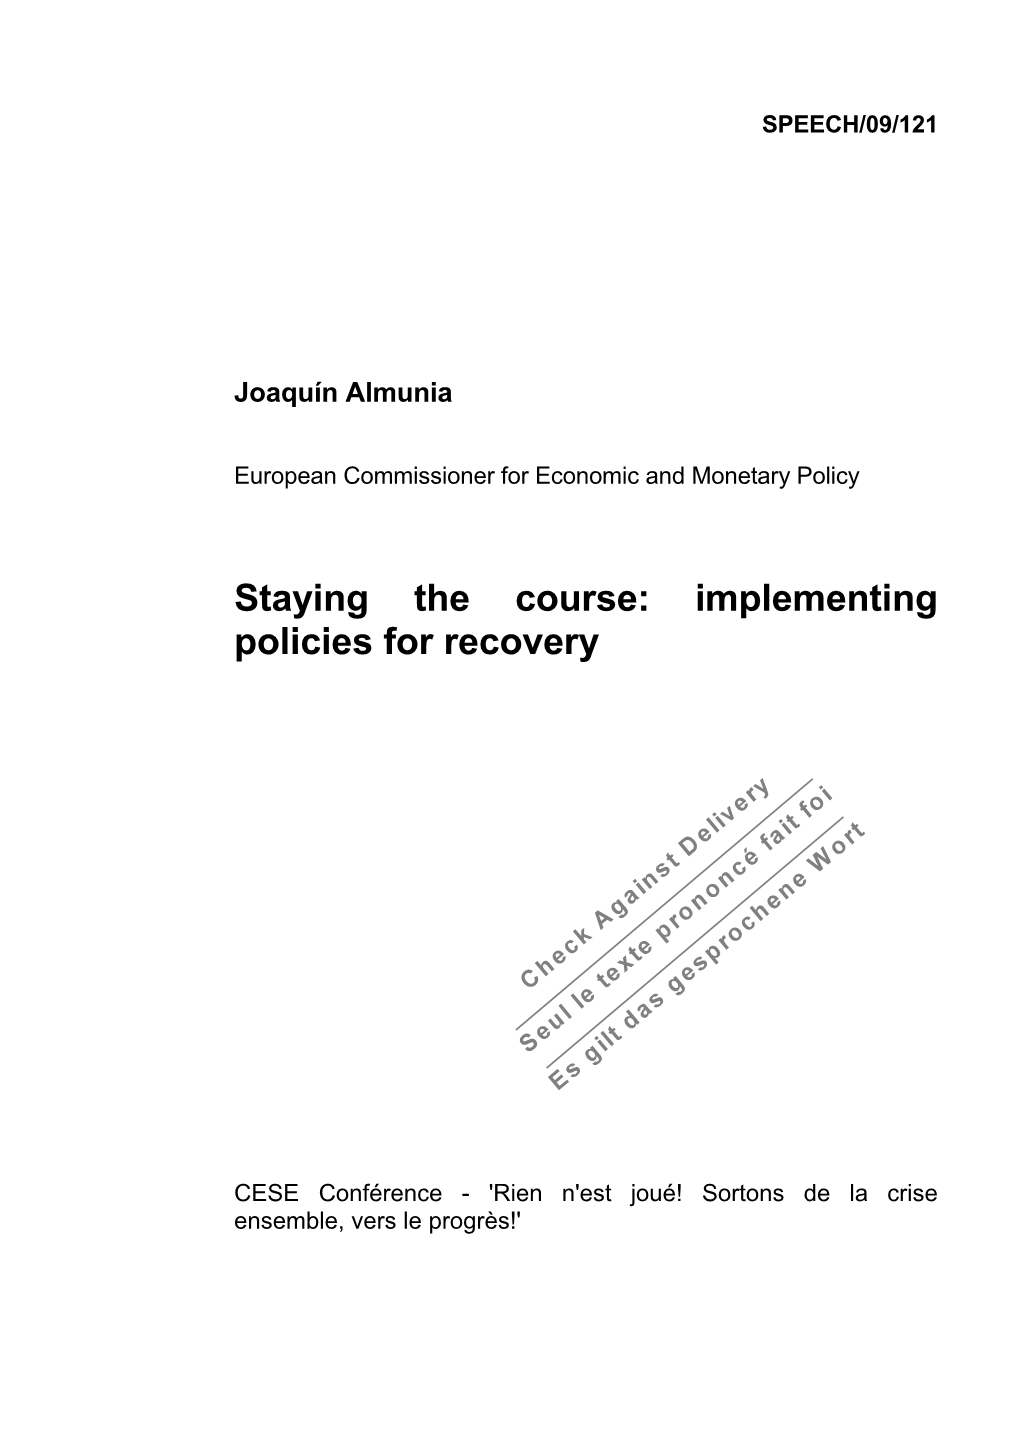 Staying the Course: Implementing Policies for Recovery